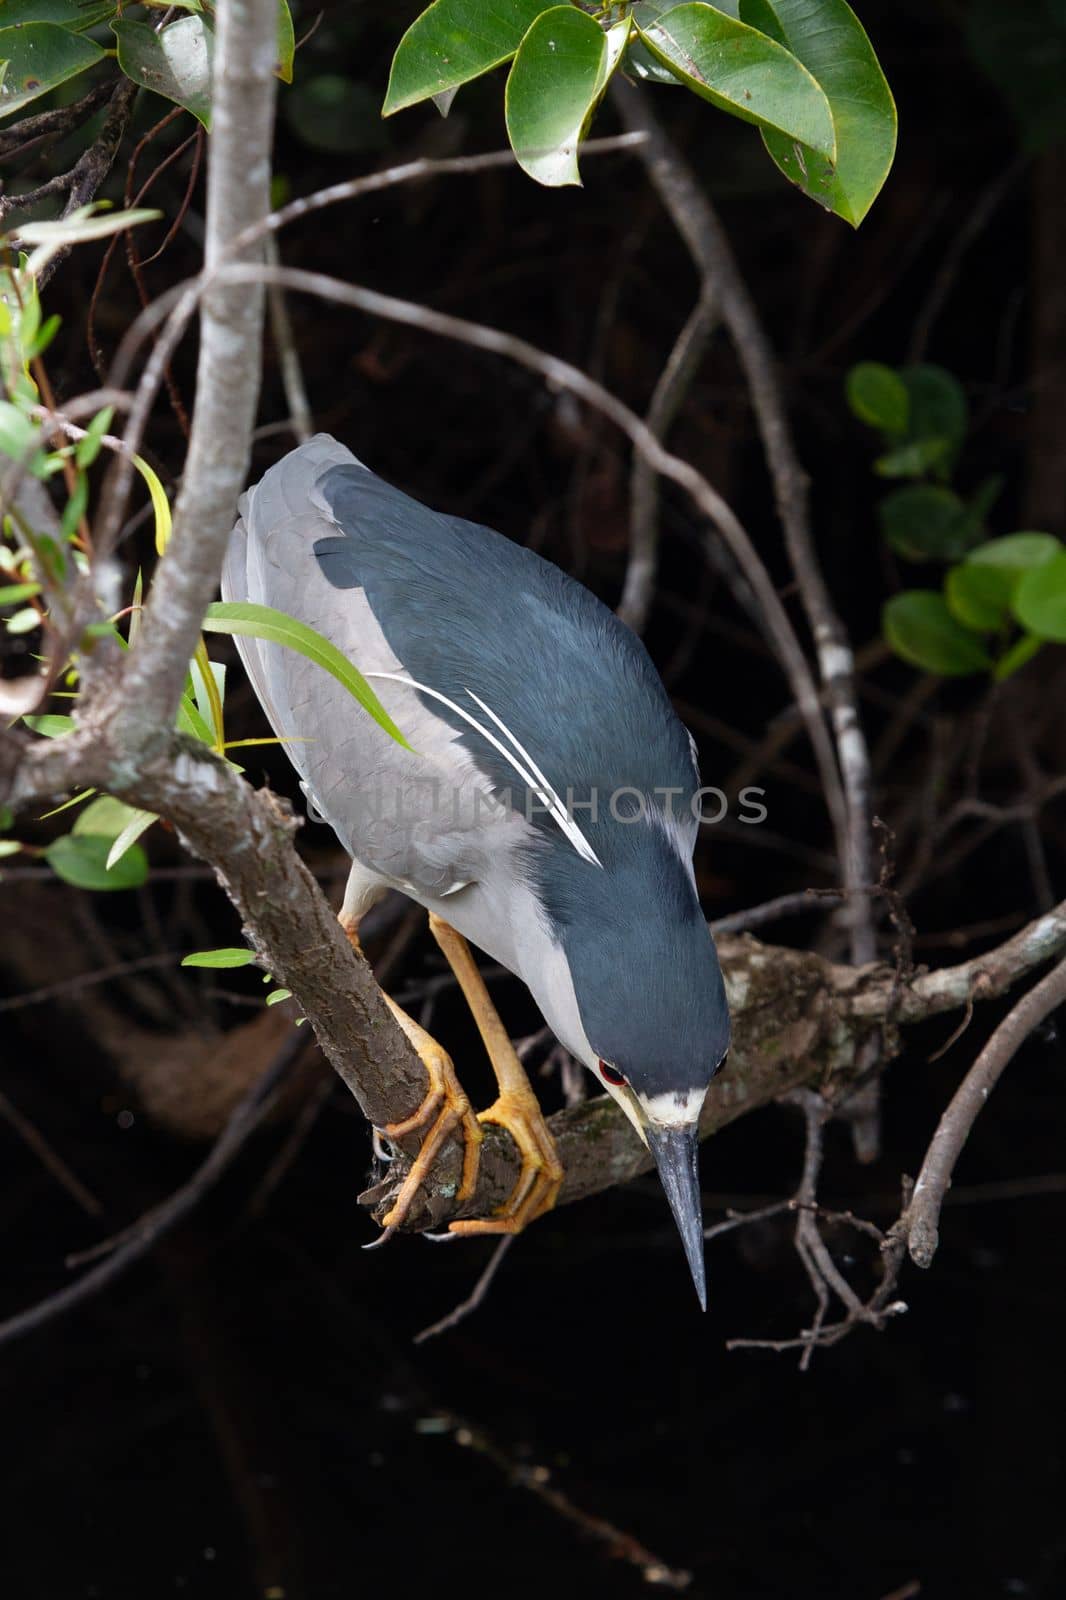 Black-crowned night heron perched on a branch and getting ready to dive. Found in Everglades by Granchinho